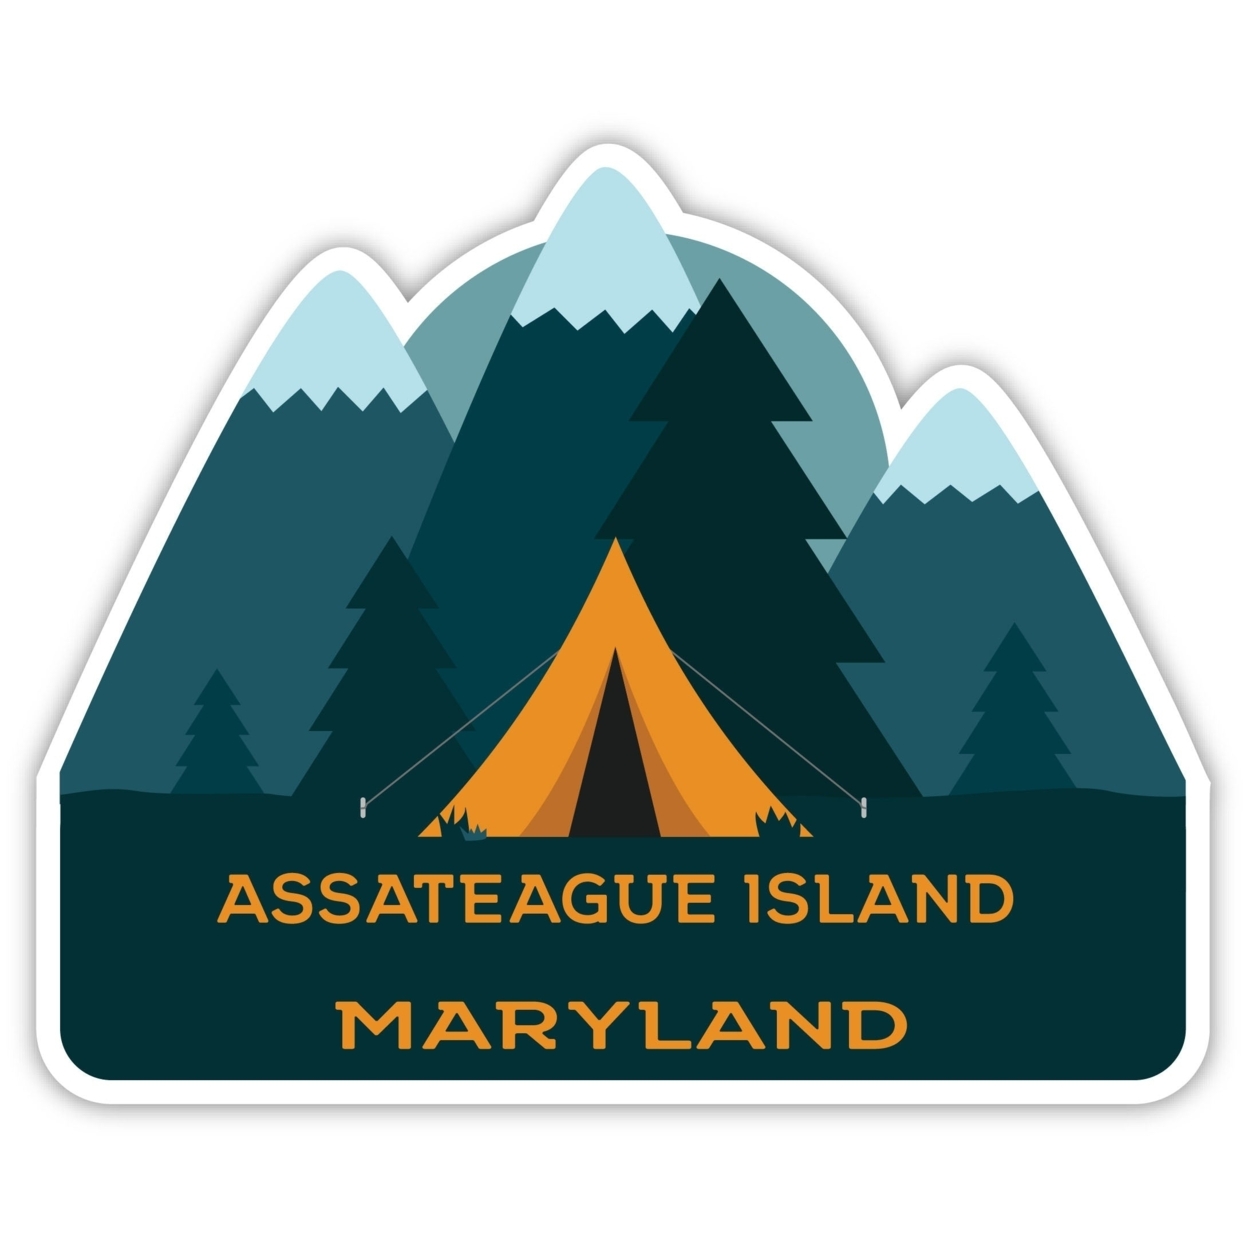 Assateague Island Maryland Souvenir Decorative Stickers (Choose Theme And Size) - 4-Pack, 6-Inch, Tent